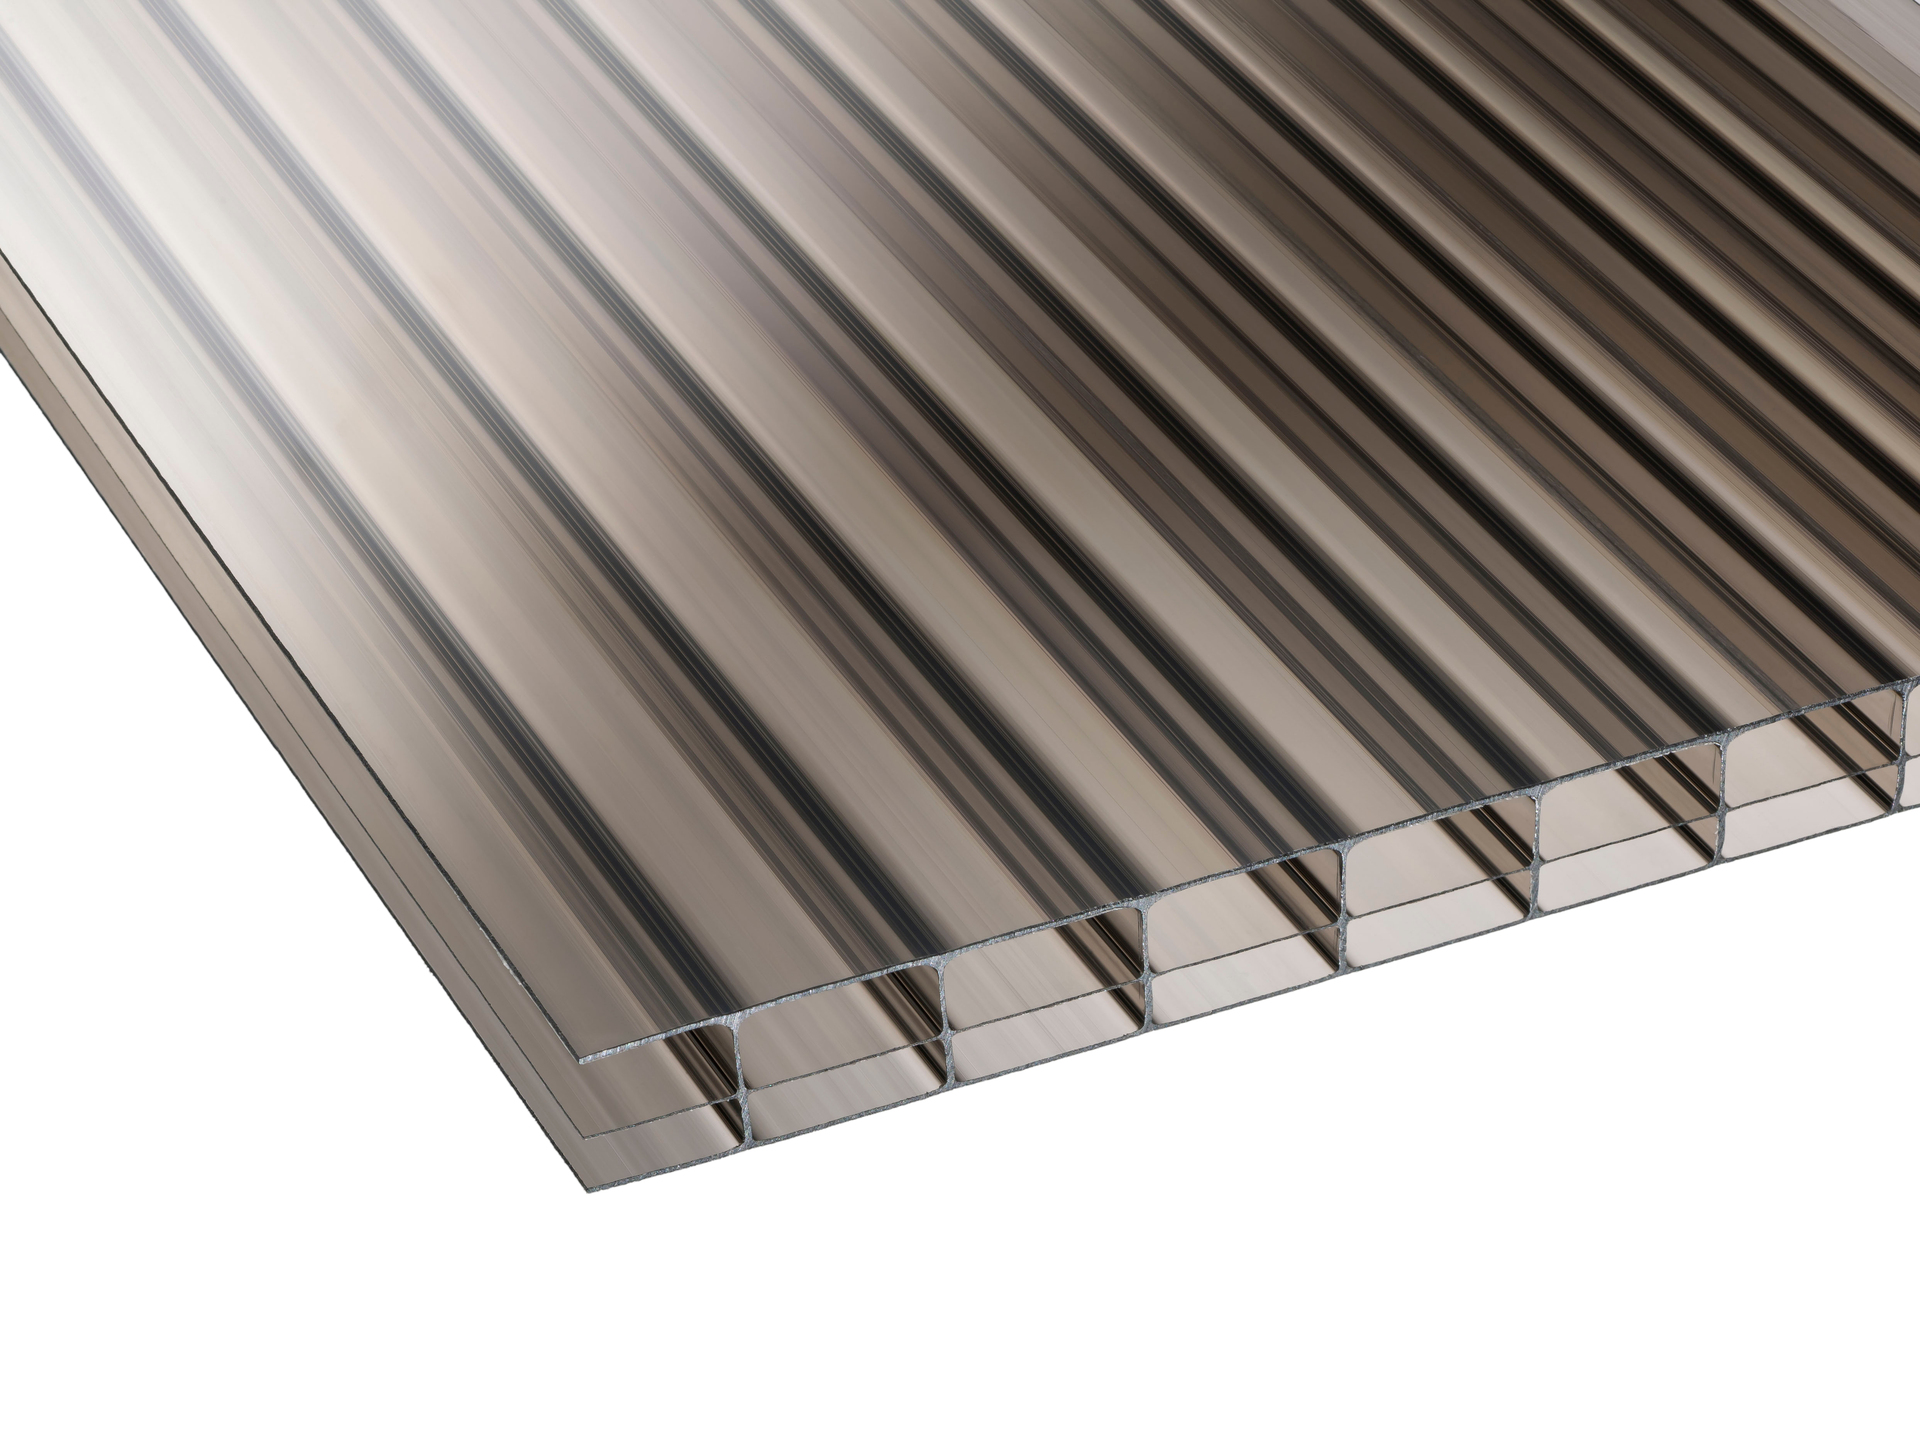 Image of 16mm Bronze Multiwall Polycarbonate Sheet - 2500 x 2100mm